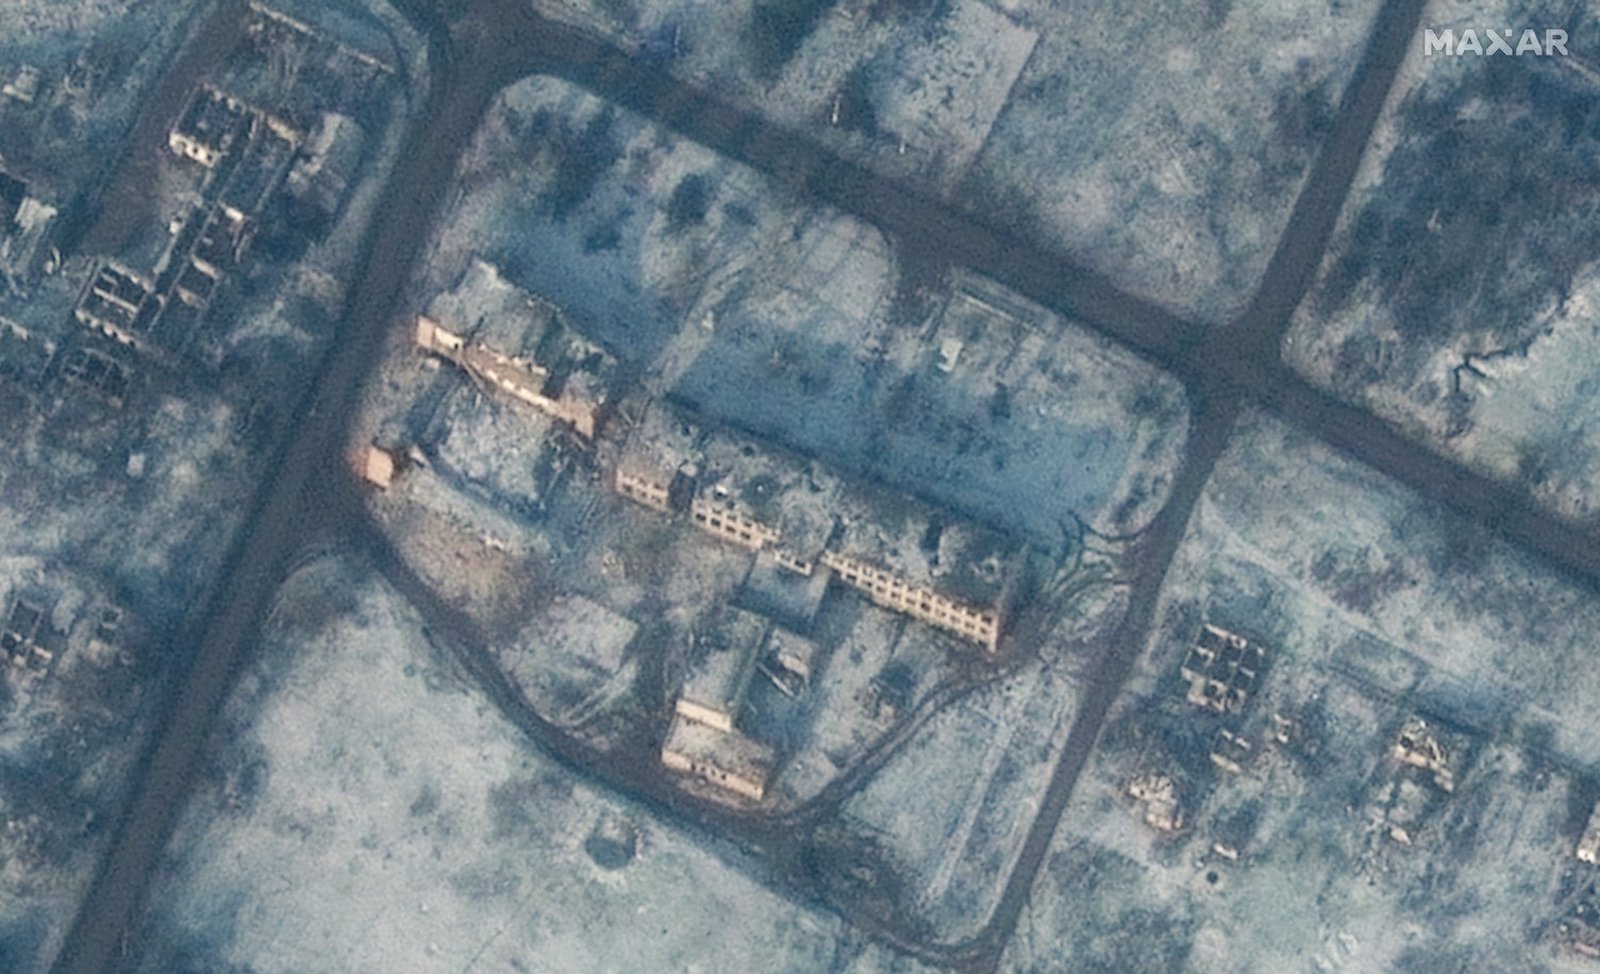 Satellite imagery shows a destroyed shows a destroyed school in Soledar on January 3, 2022.